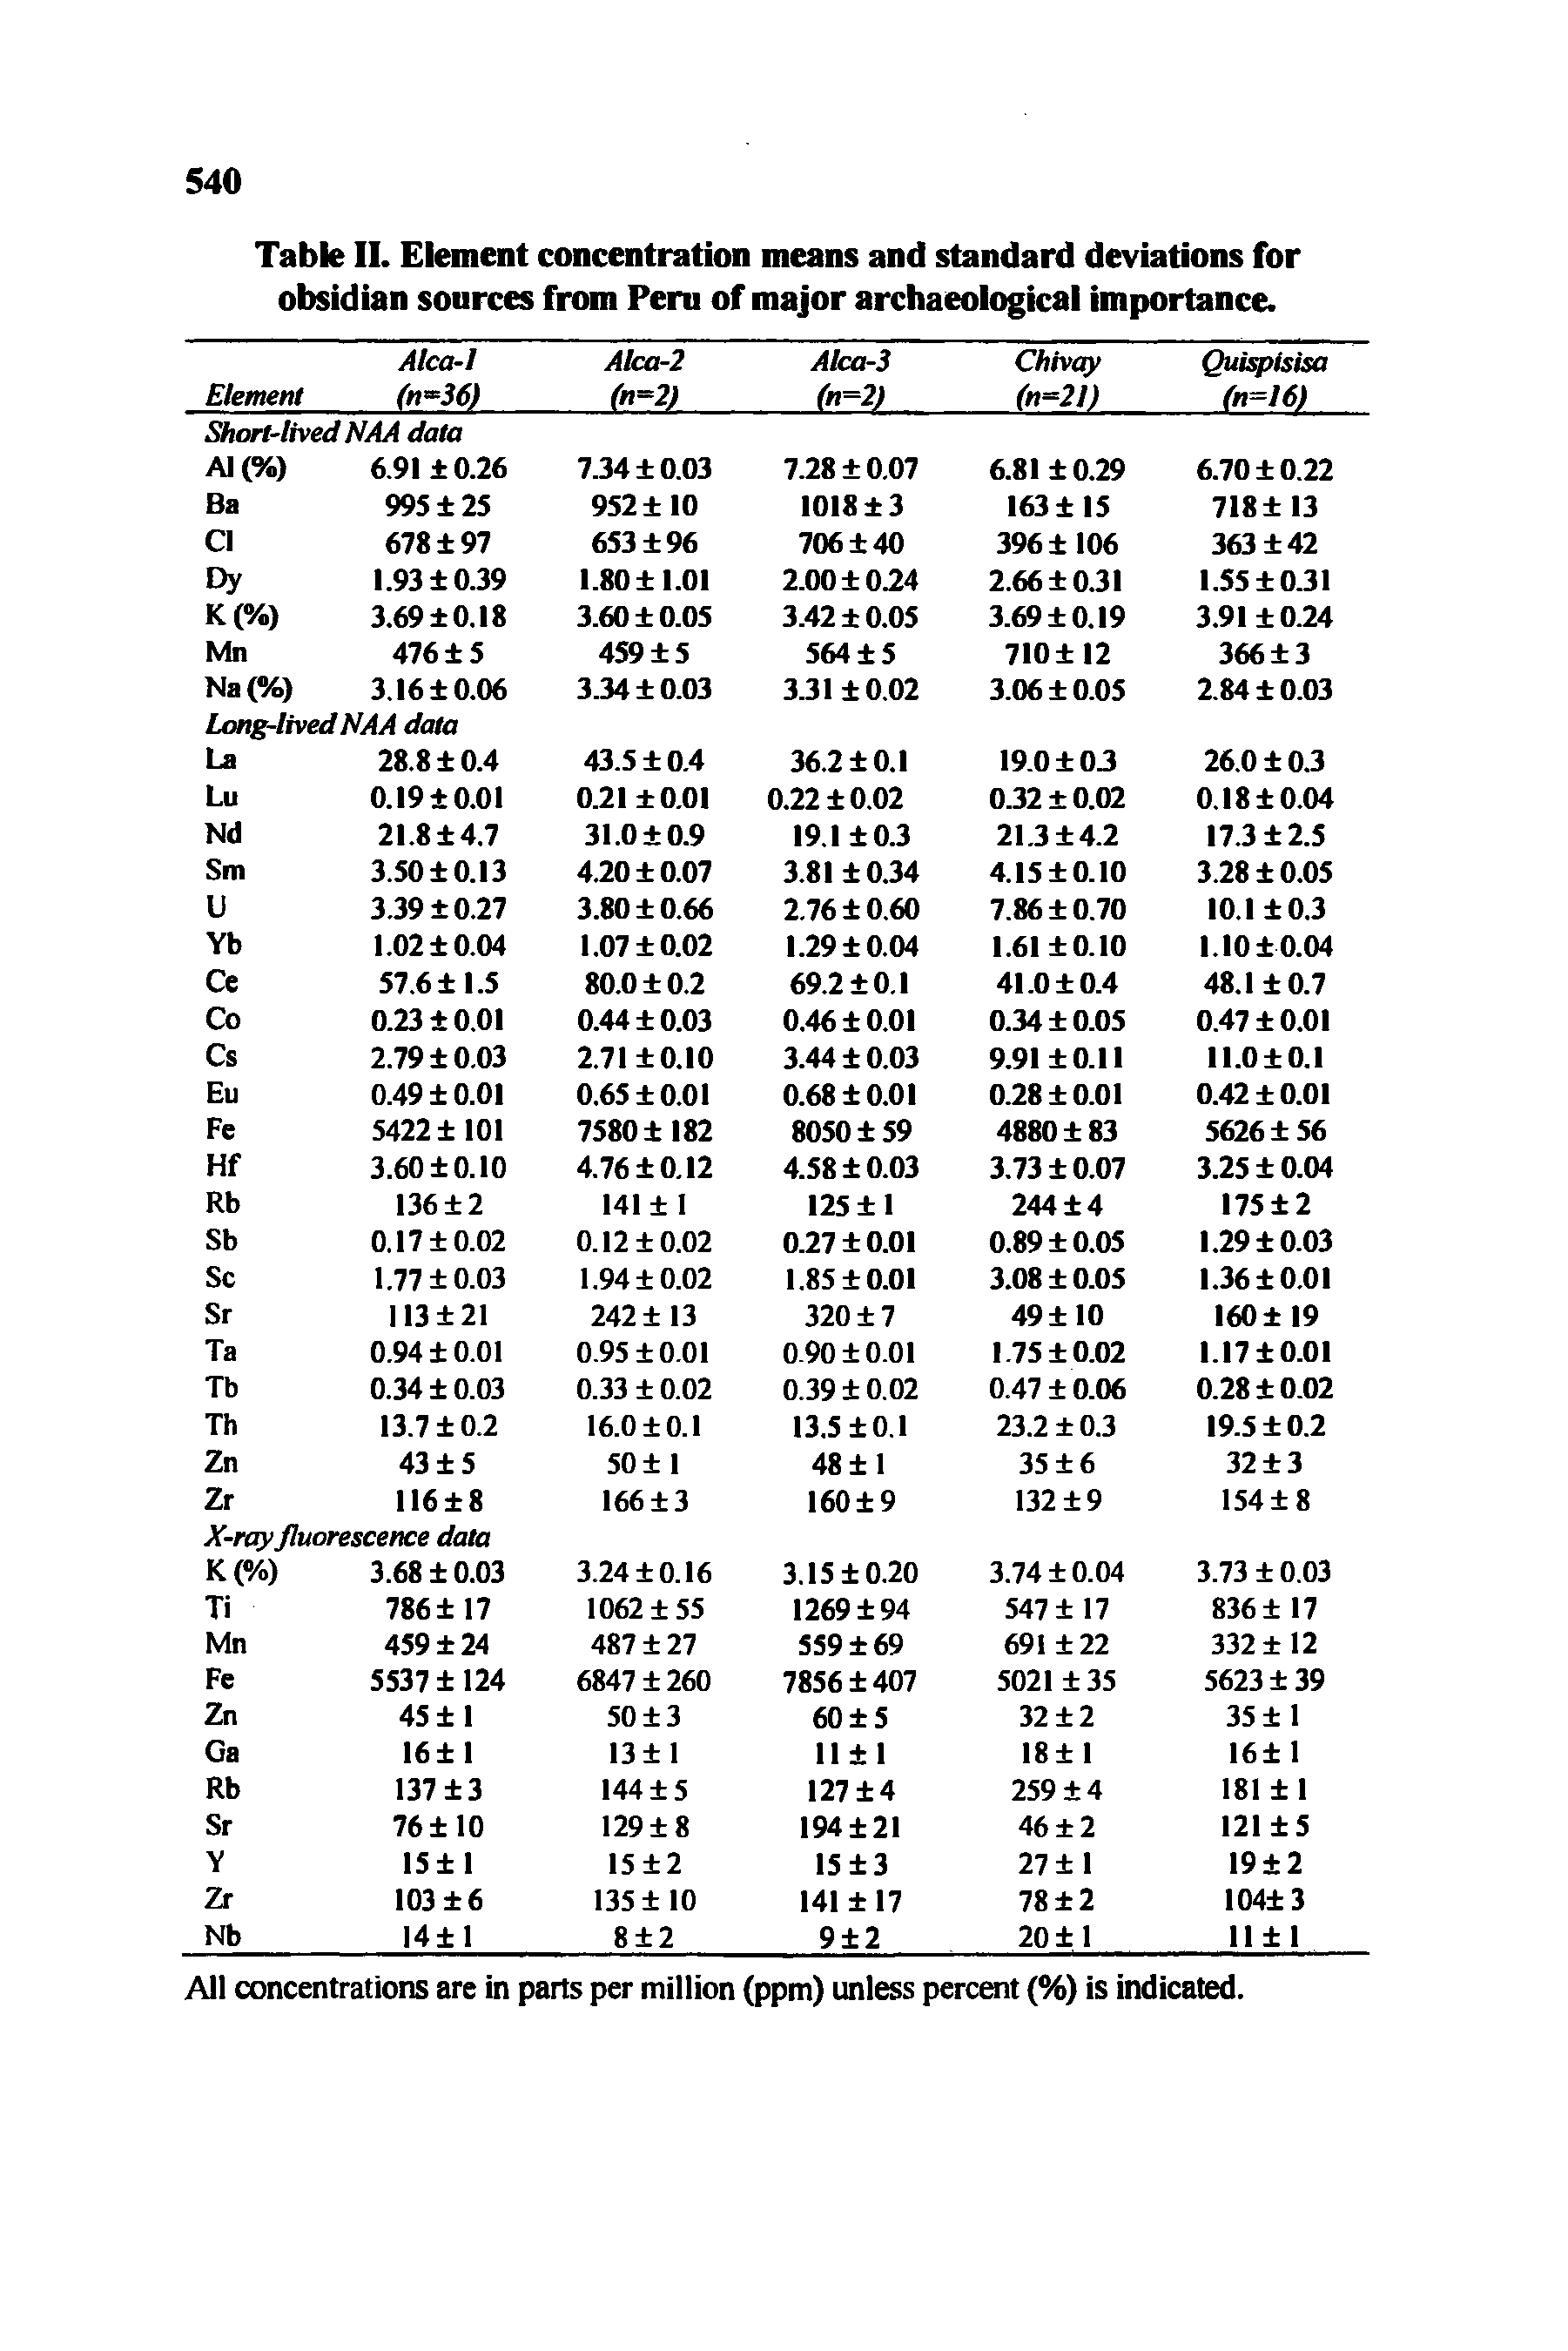 Table II. Element concentration means and standard deviations for obsidian sources from Peru of major archaeological importance.